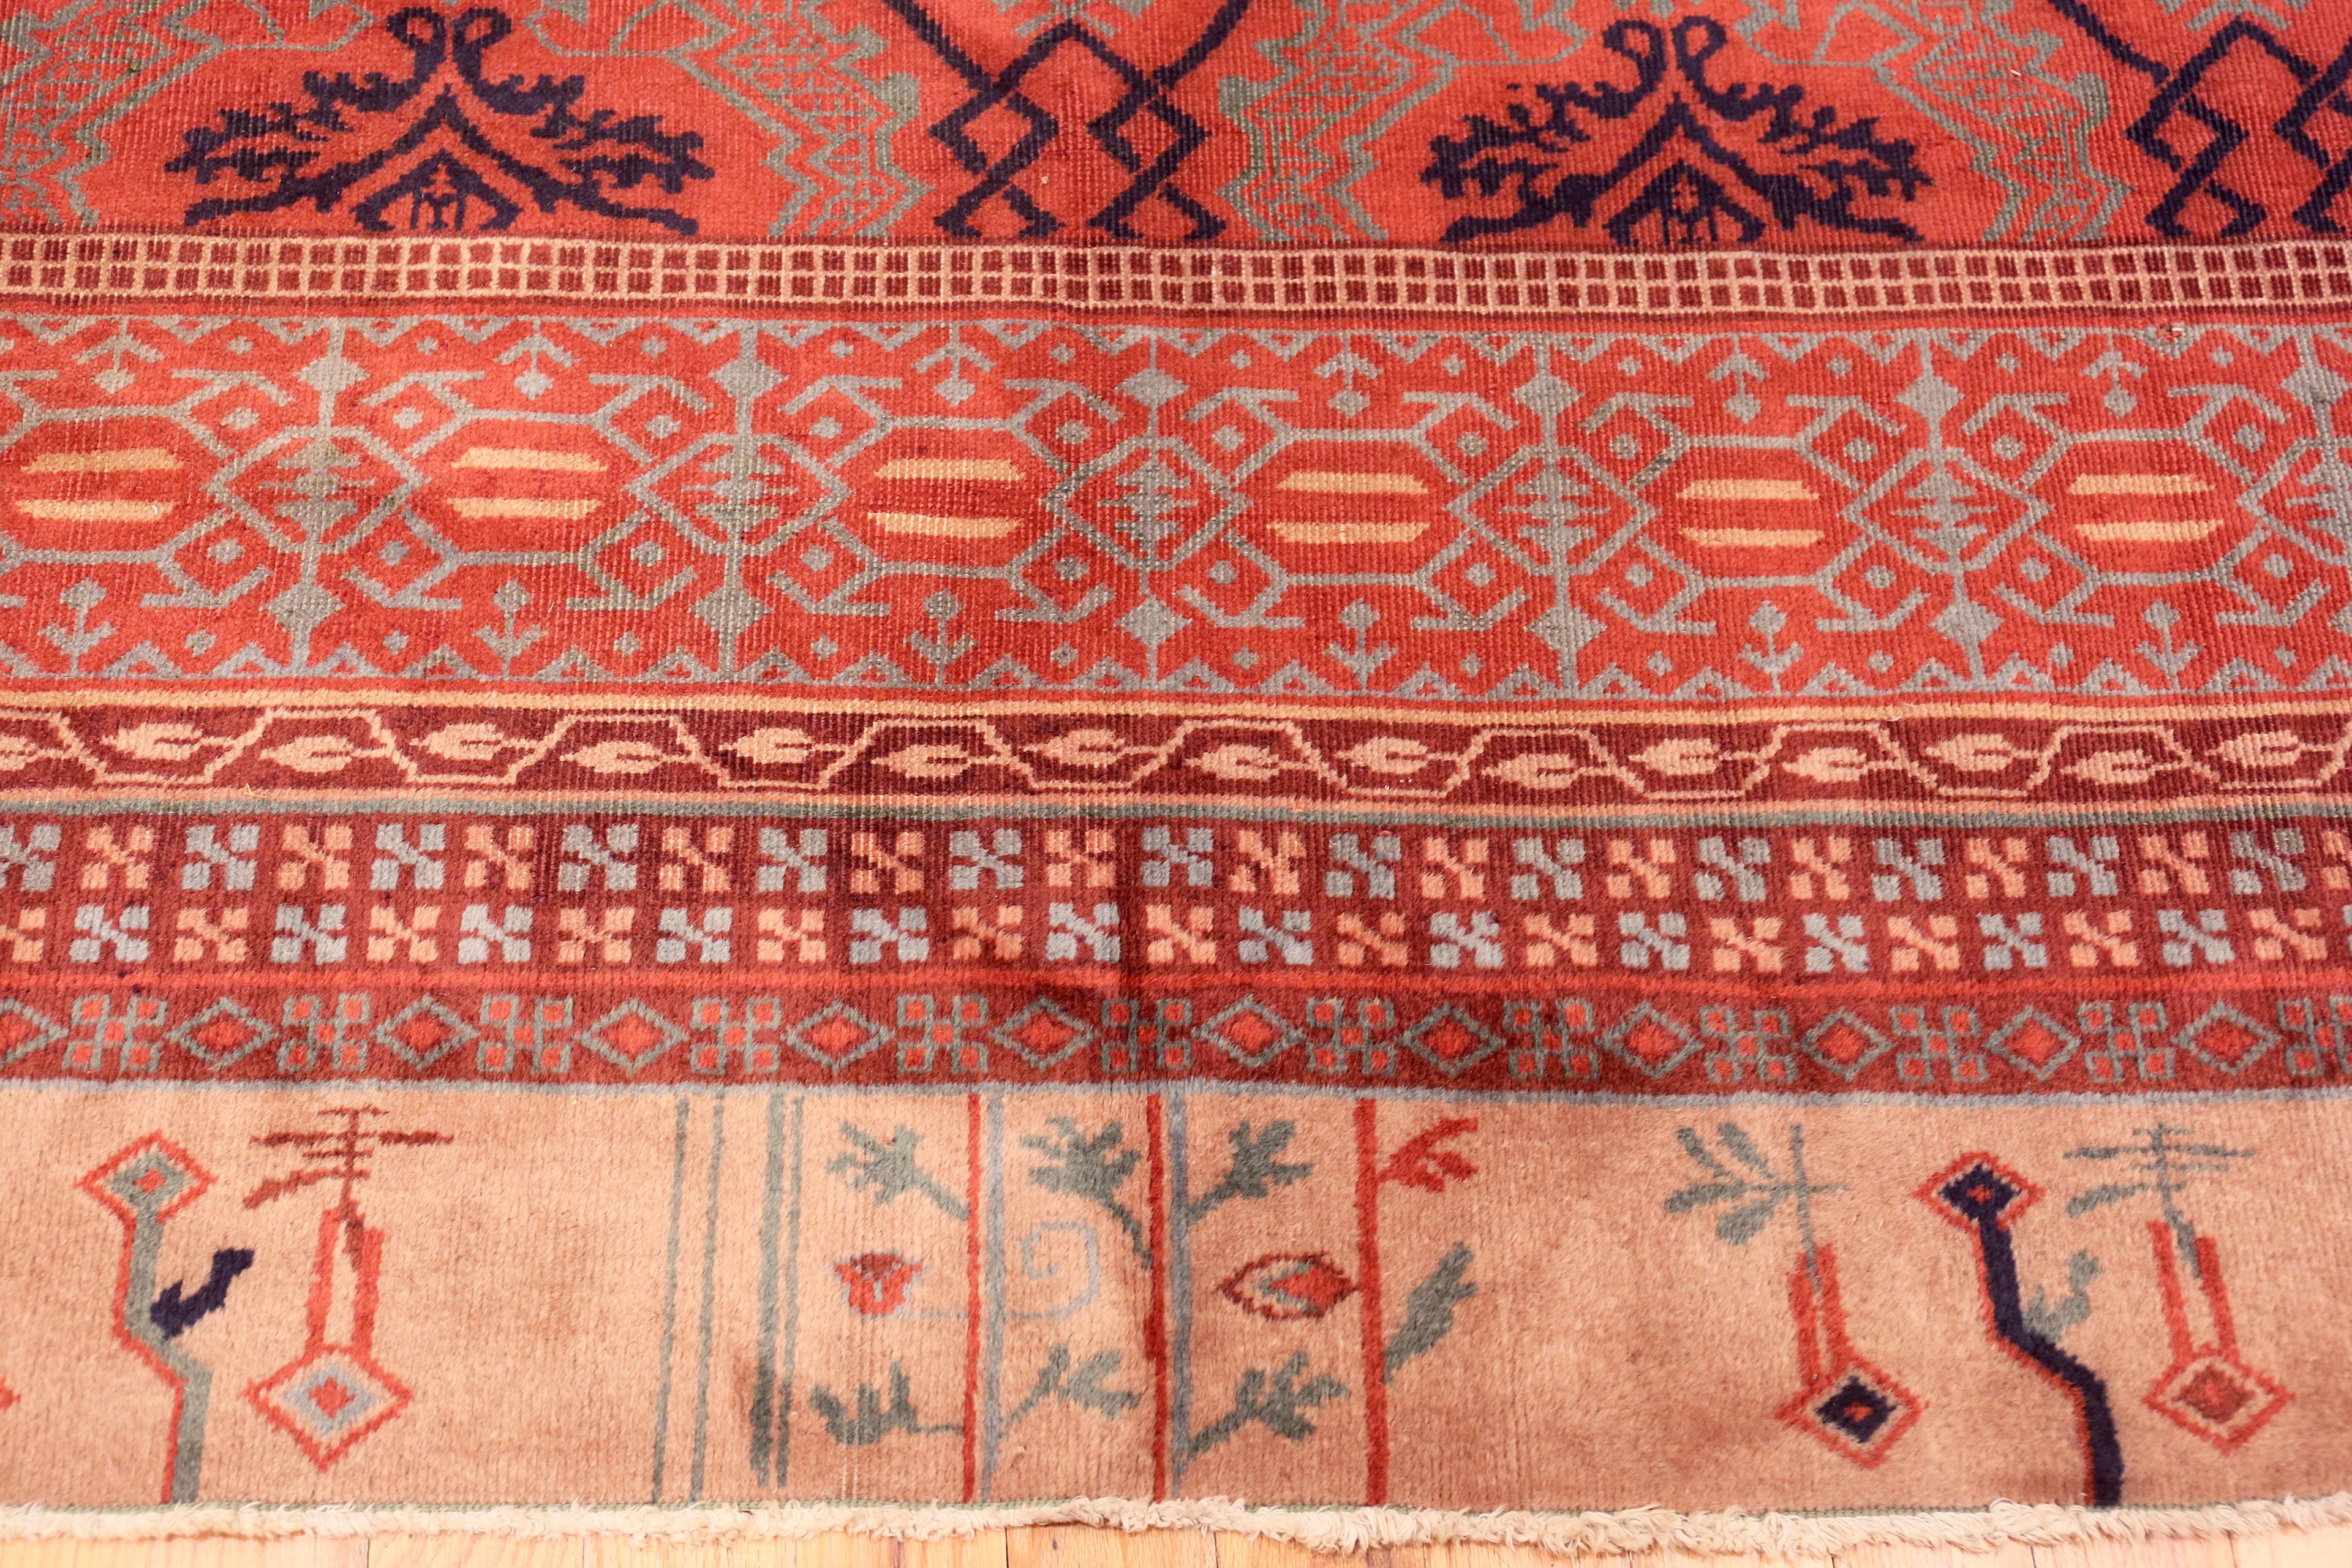 A magnificent Antique Turkish Smyrna Area Rug, country of origin/rug type: antique Turkish rugs, circa date: 1920. Size: 10 ft 5 in x 13 ft 9 in (3.17 m x 4.19 m)


